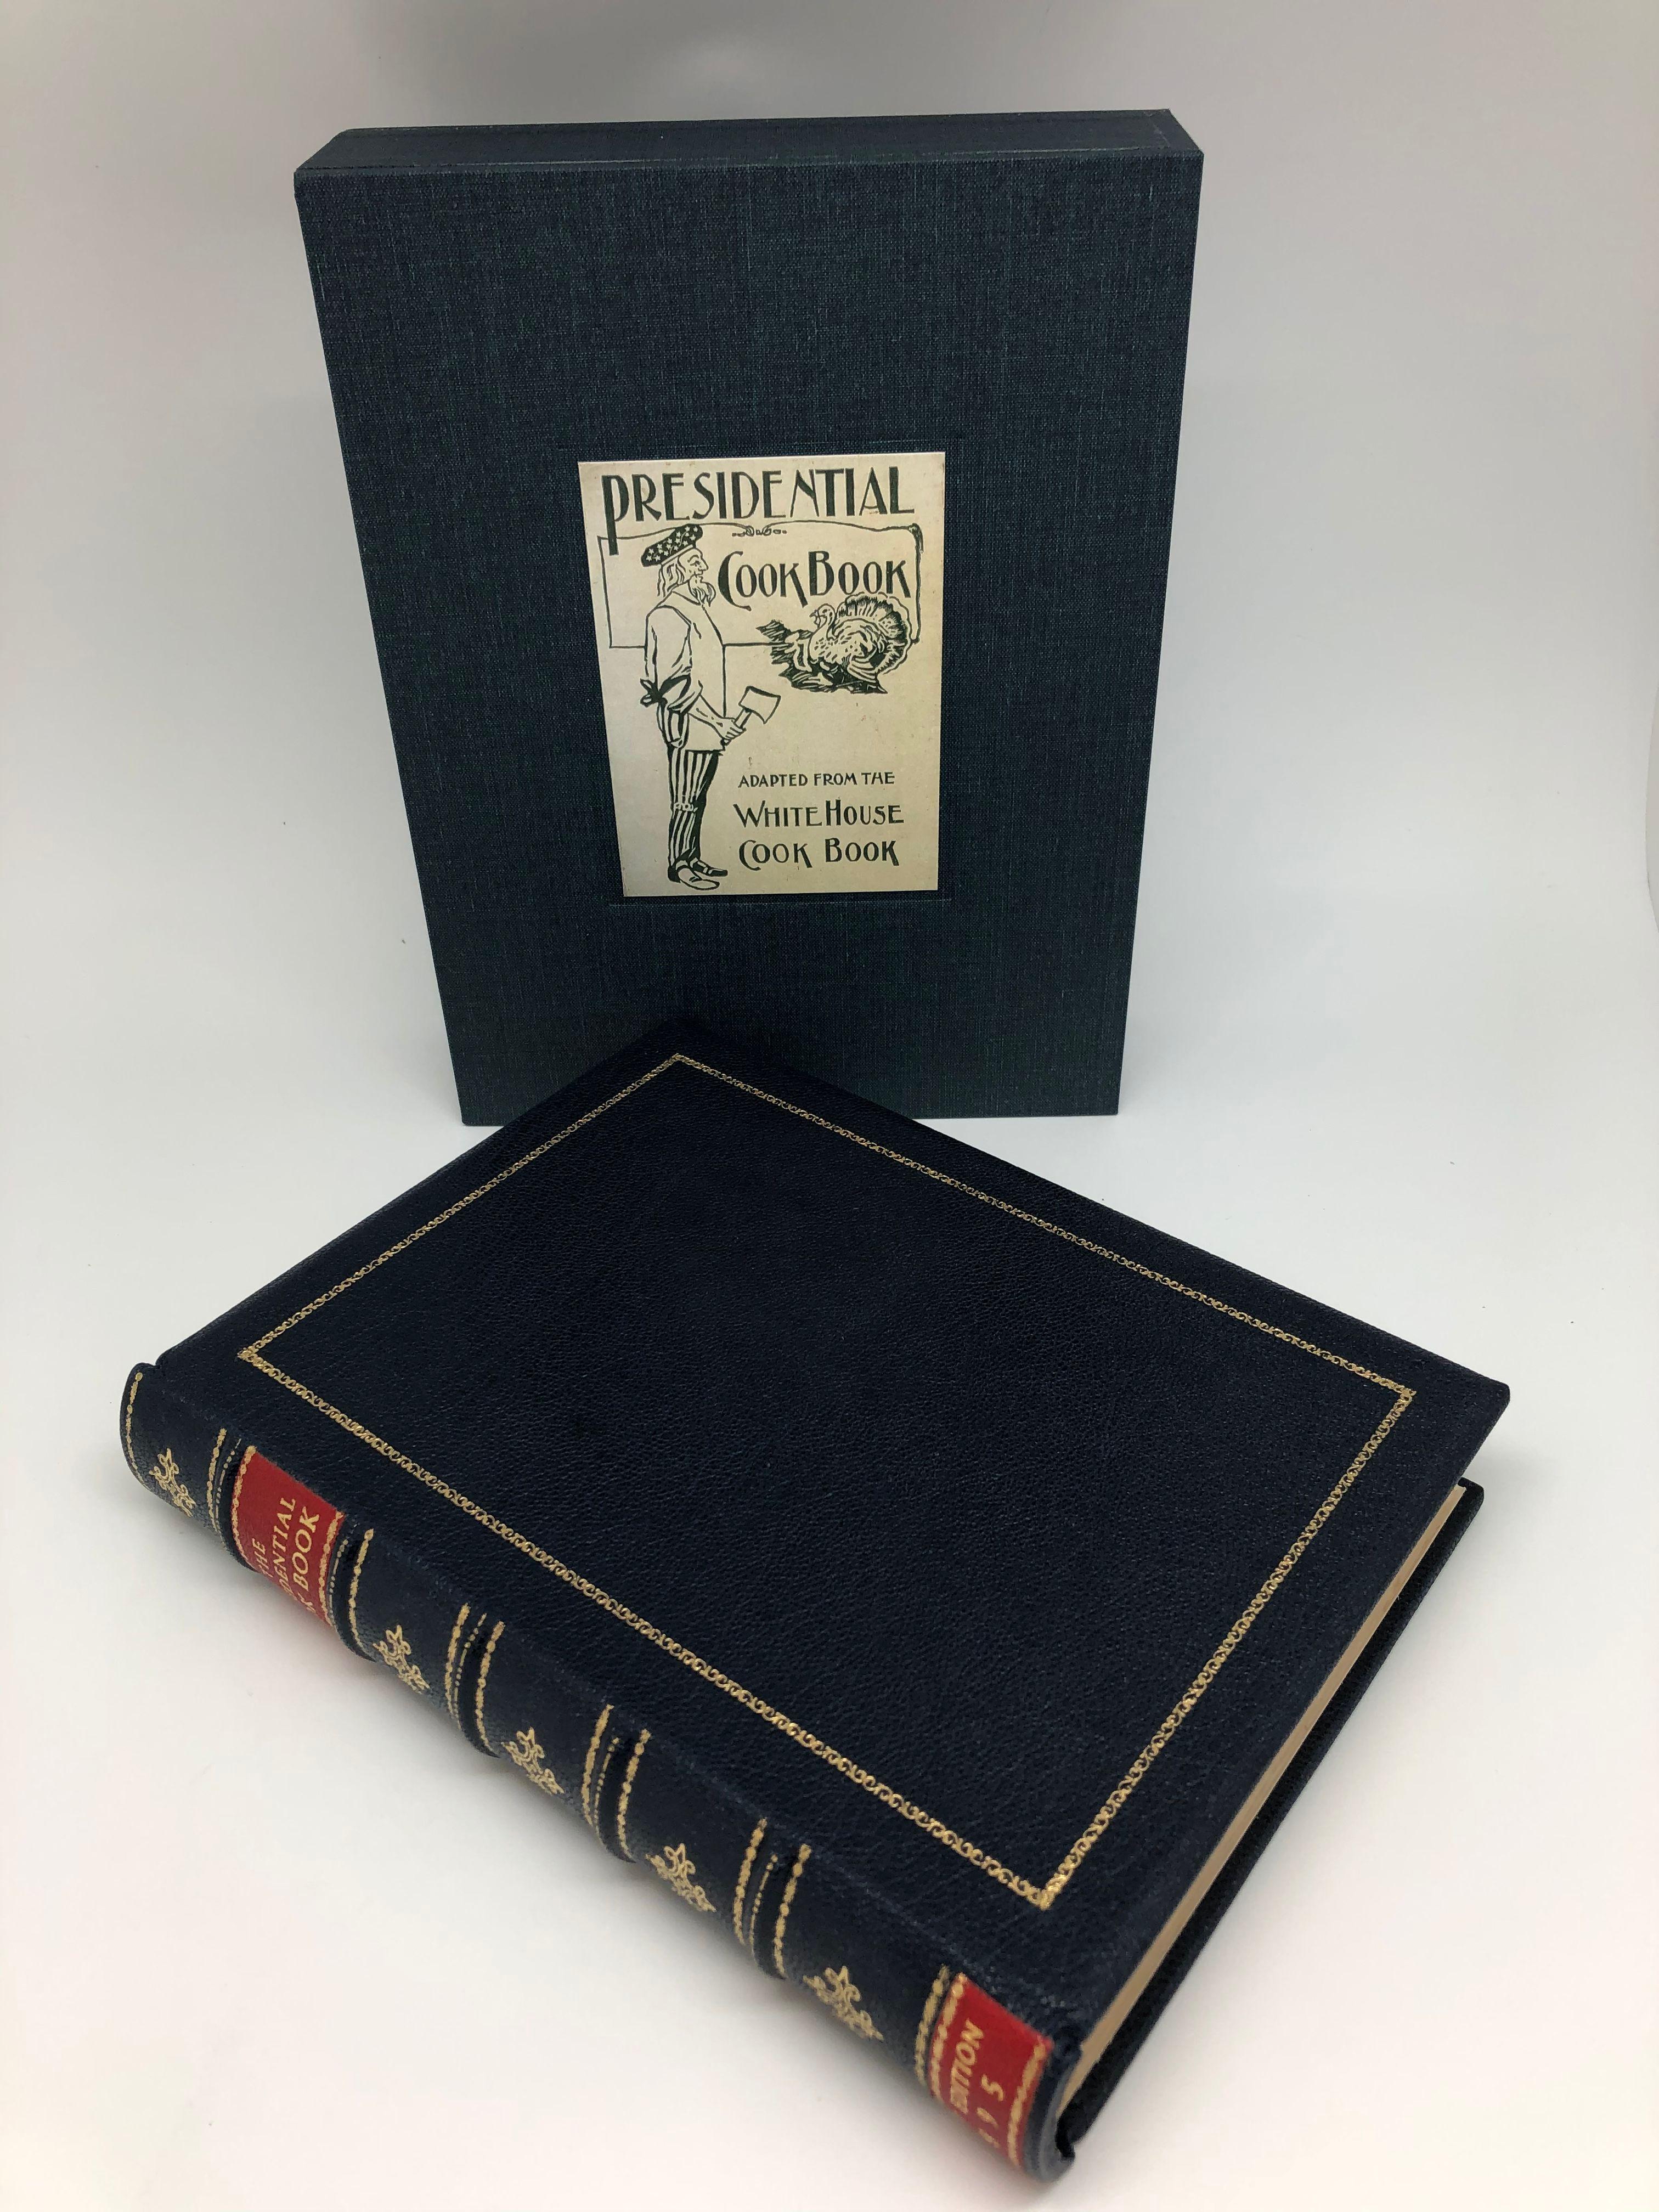 Presidential Cook Book: Adapted from the White House Cook Book. New York and Chicago: The Werner Company, 1895. First edition. Rebound with matching slipcase.

Presented is a first edition of the Presidential Cook Book: Adapted from the White